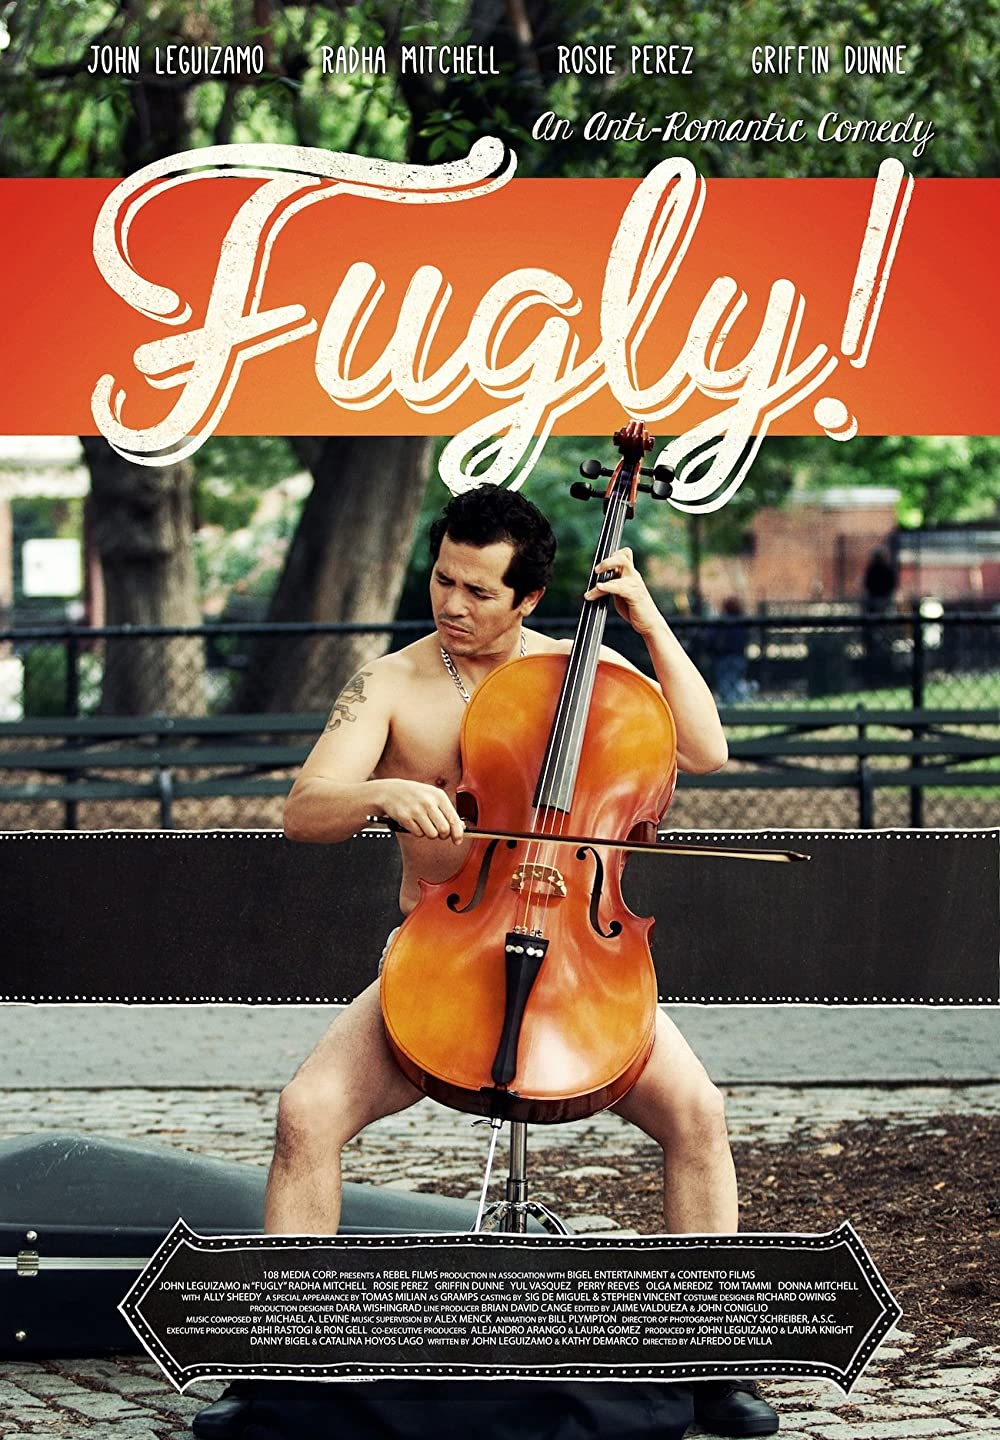 Fugly! poster